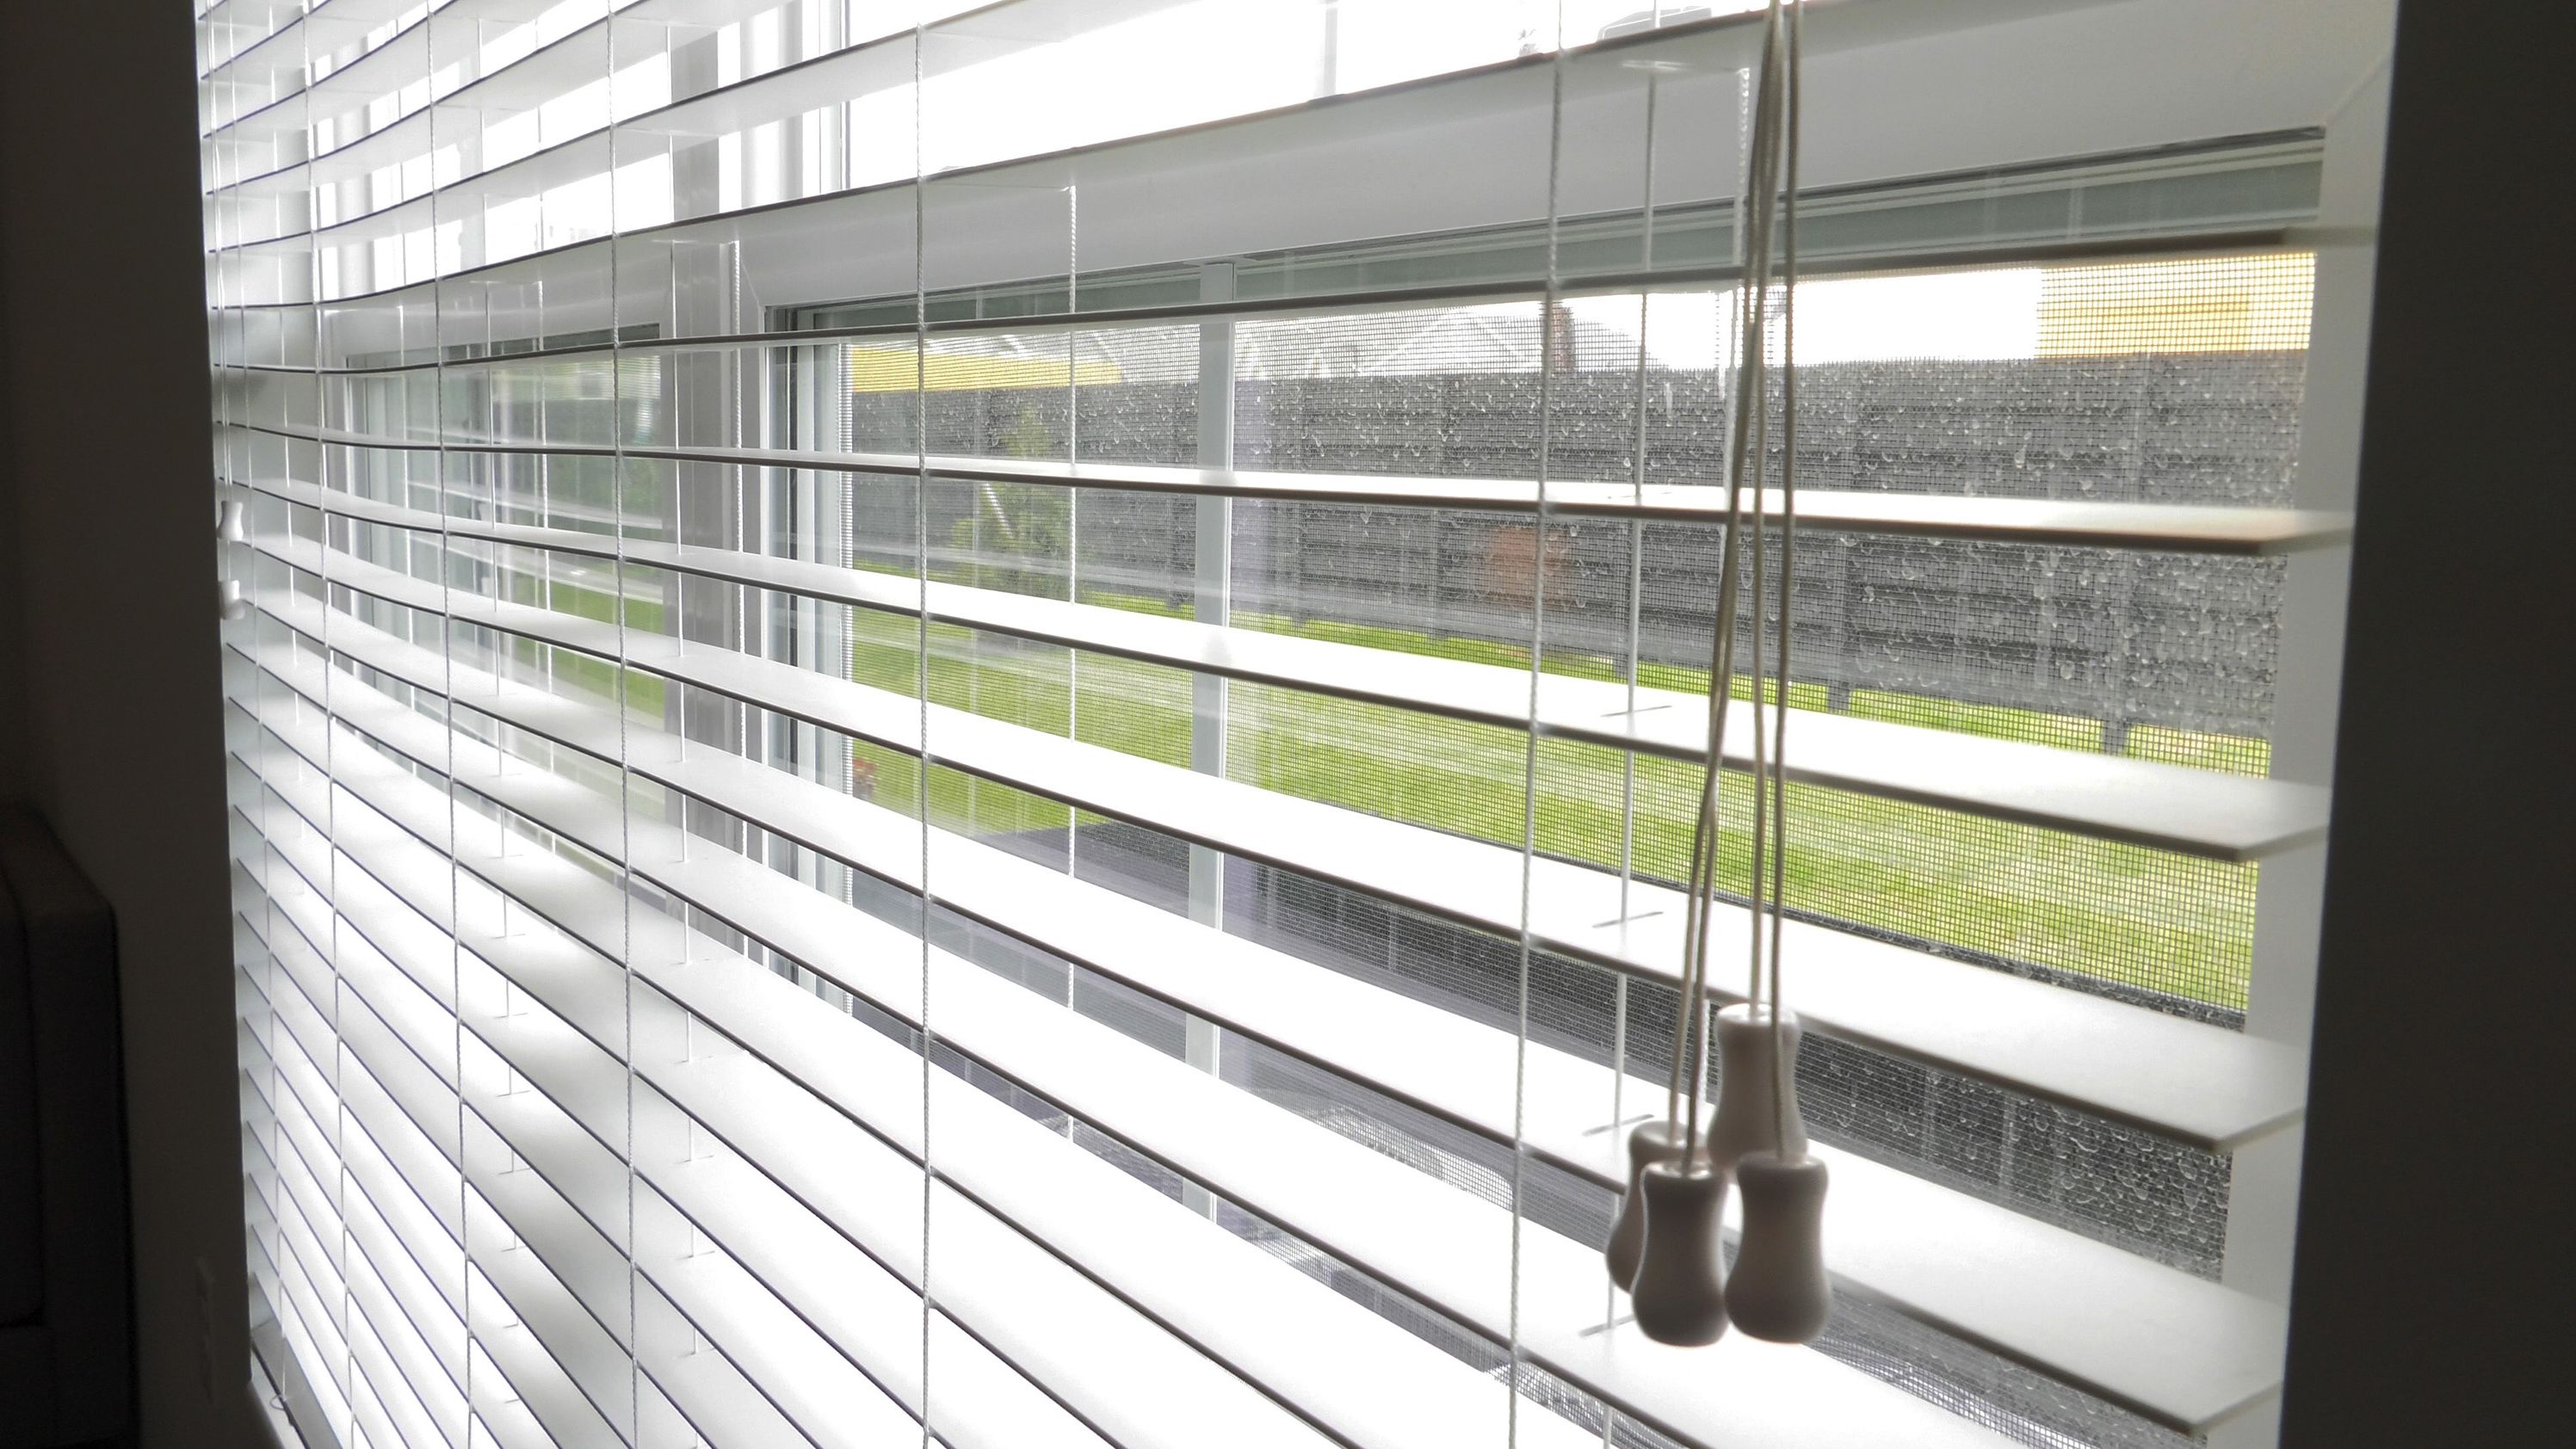 A new study found about two young children are injured every day in window blind-related incidents.